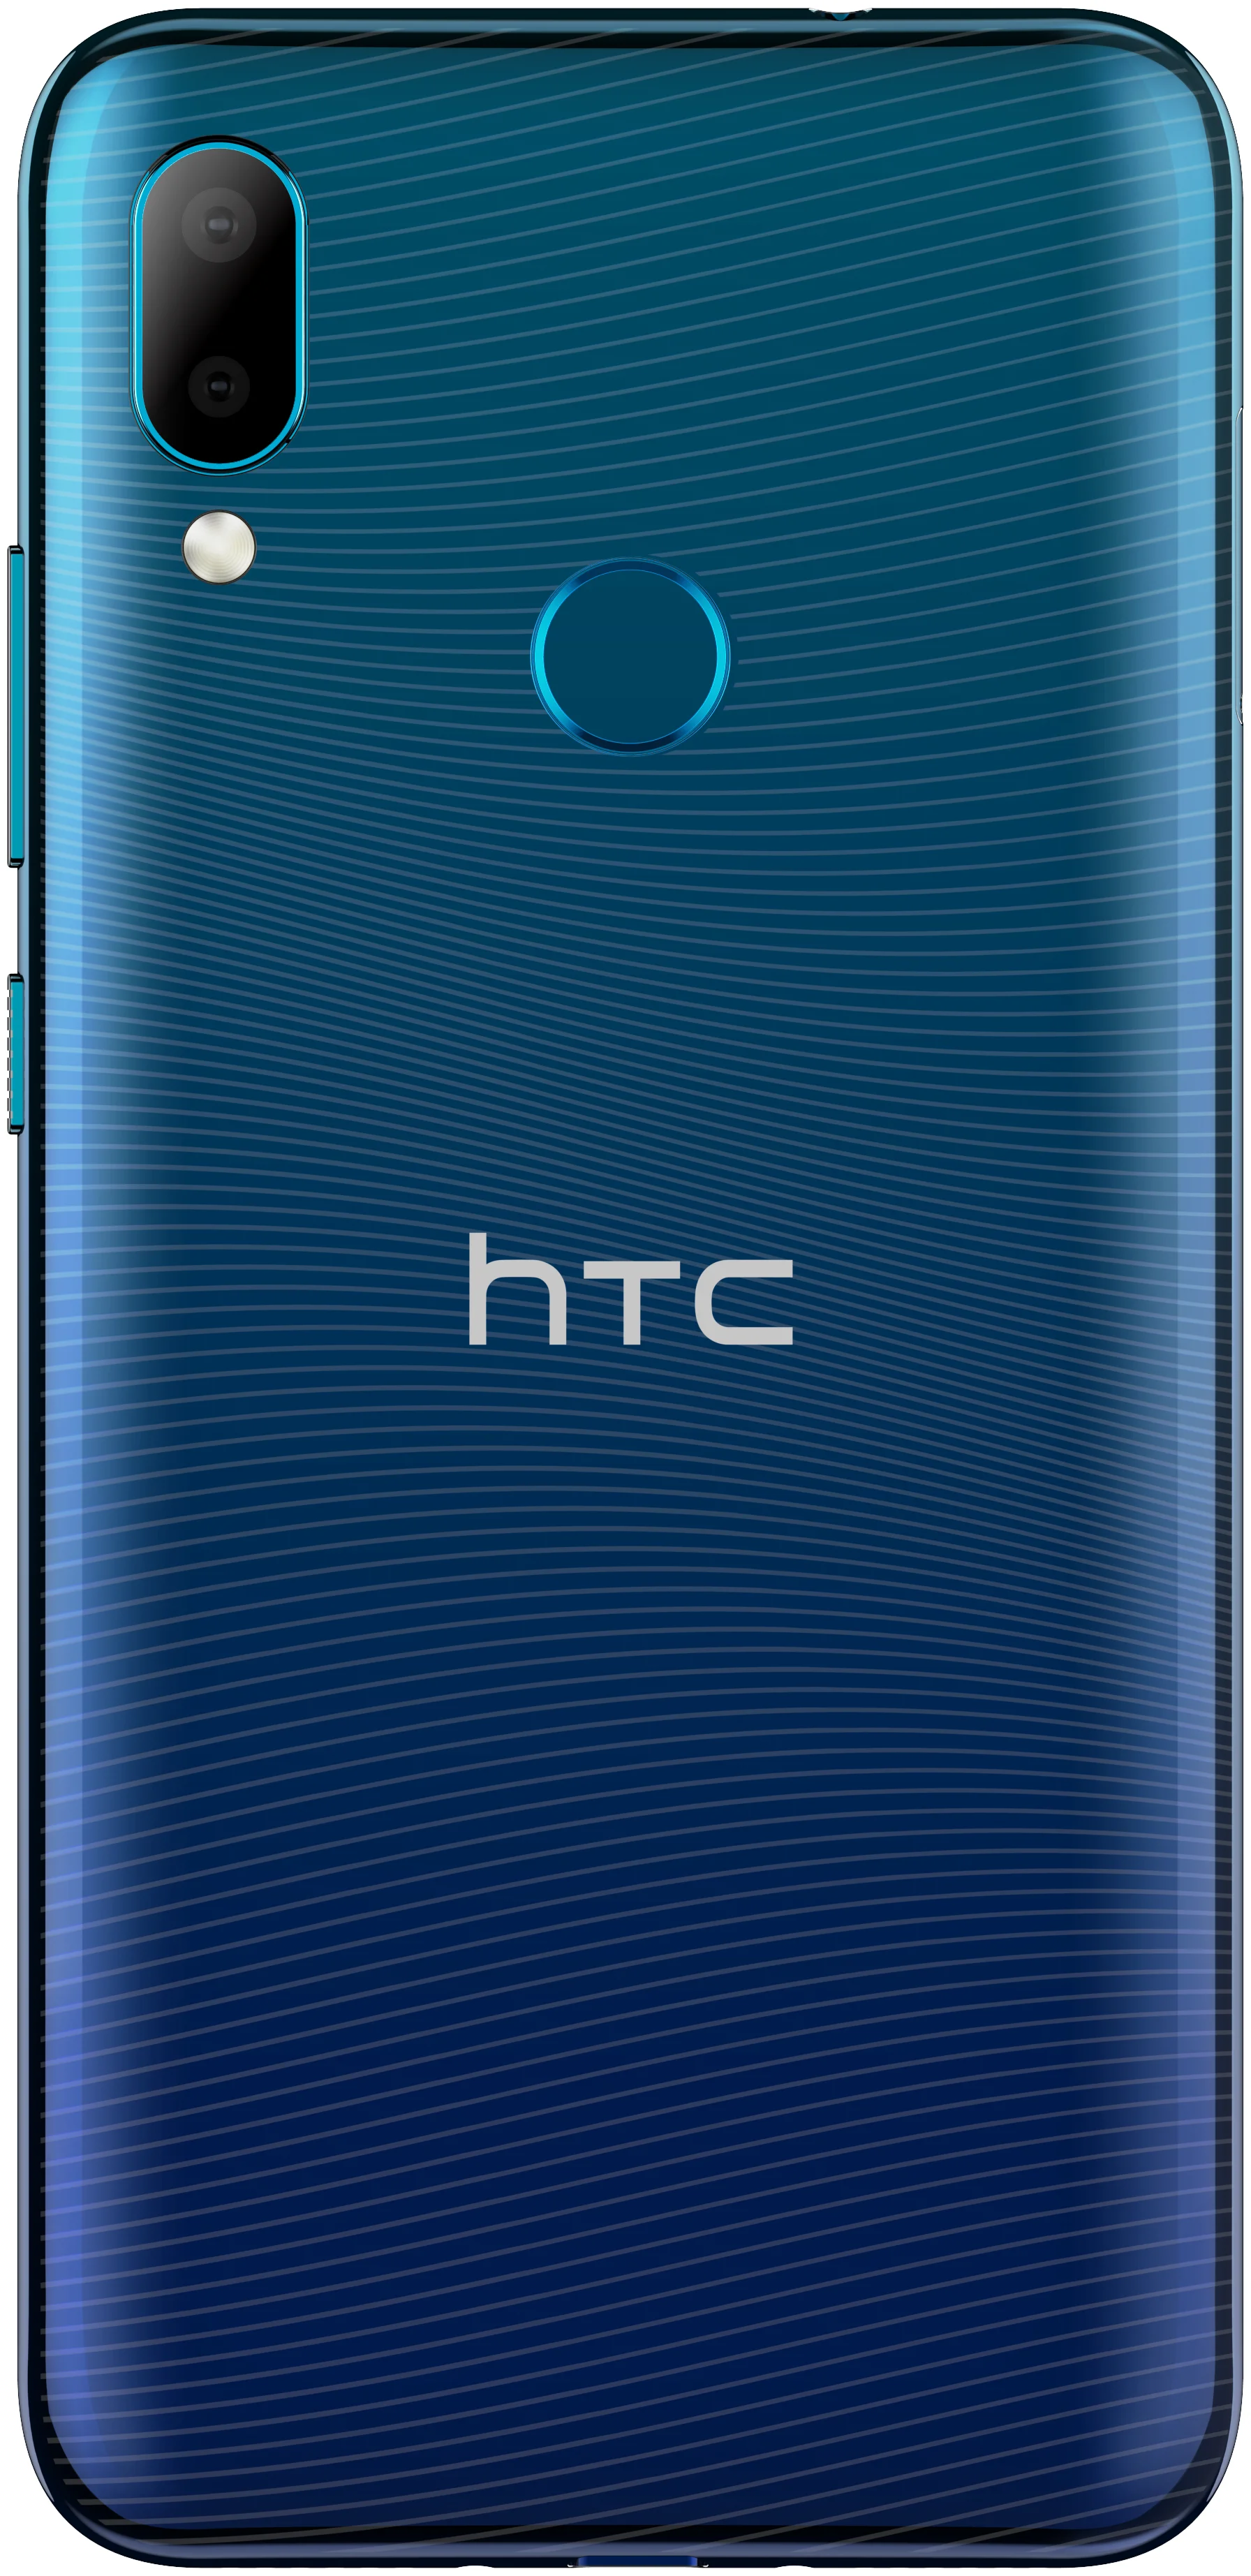 HTC Wildfire E2 - двойная камера: 16 МП, 2 МП